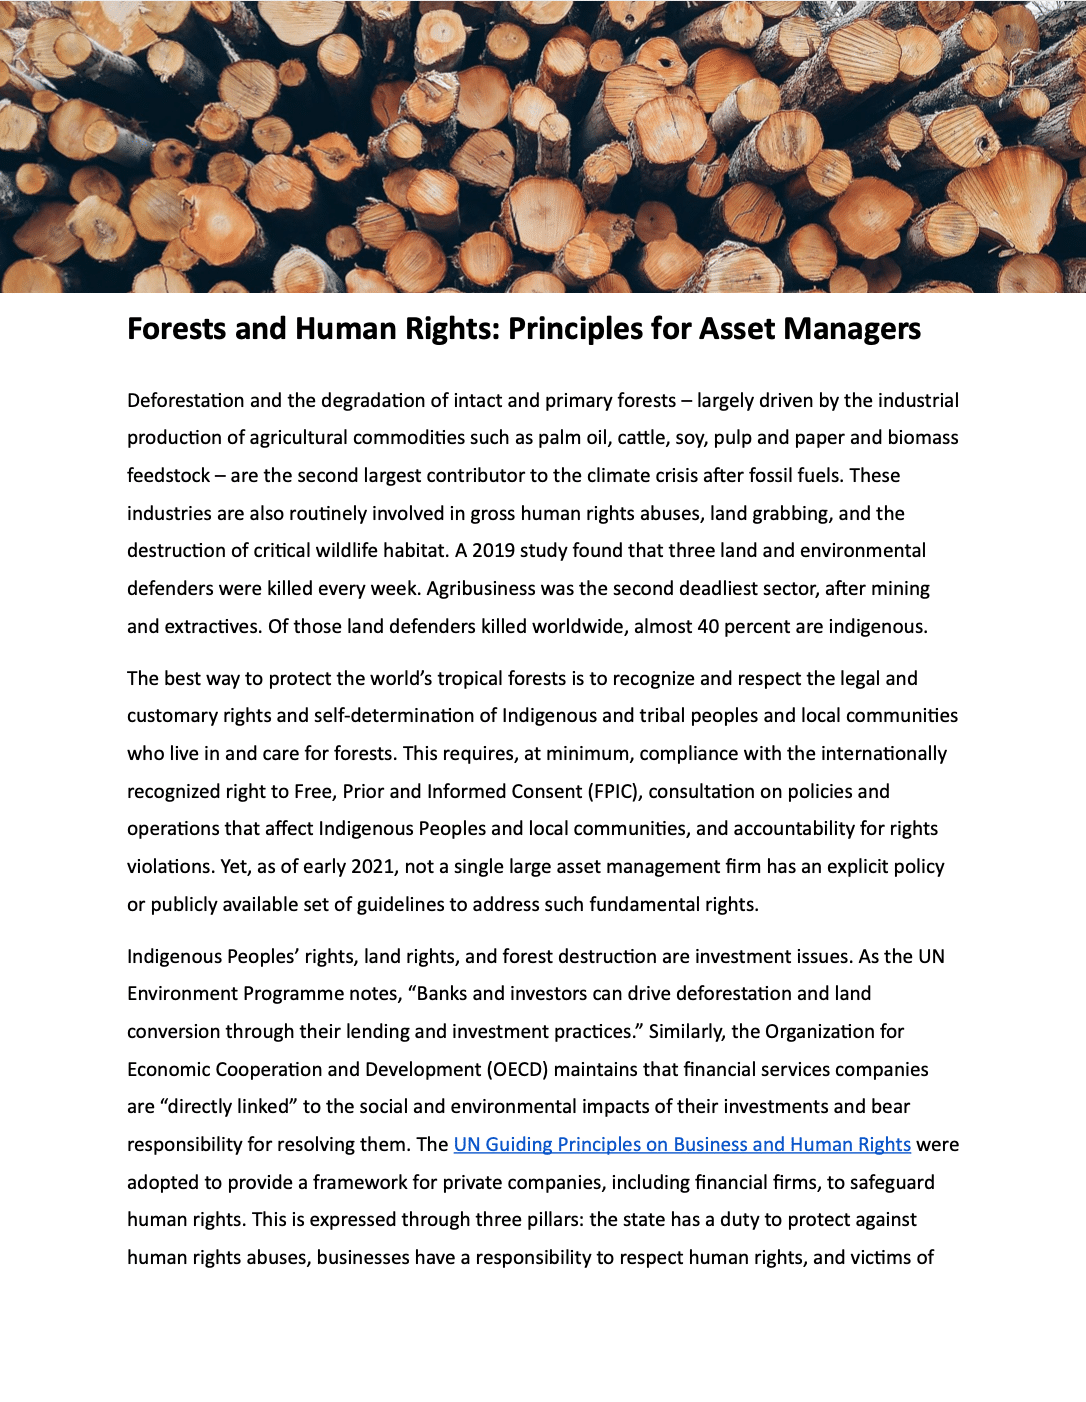 Forests and Human Rights: Principles for Asset Managers